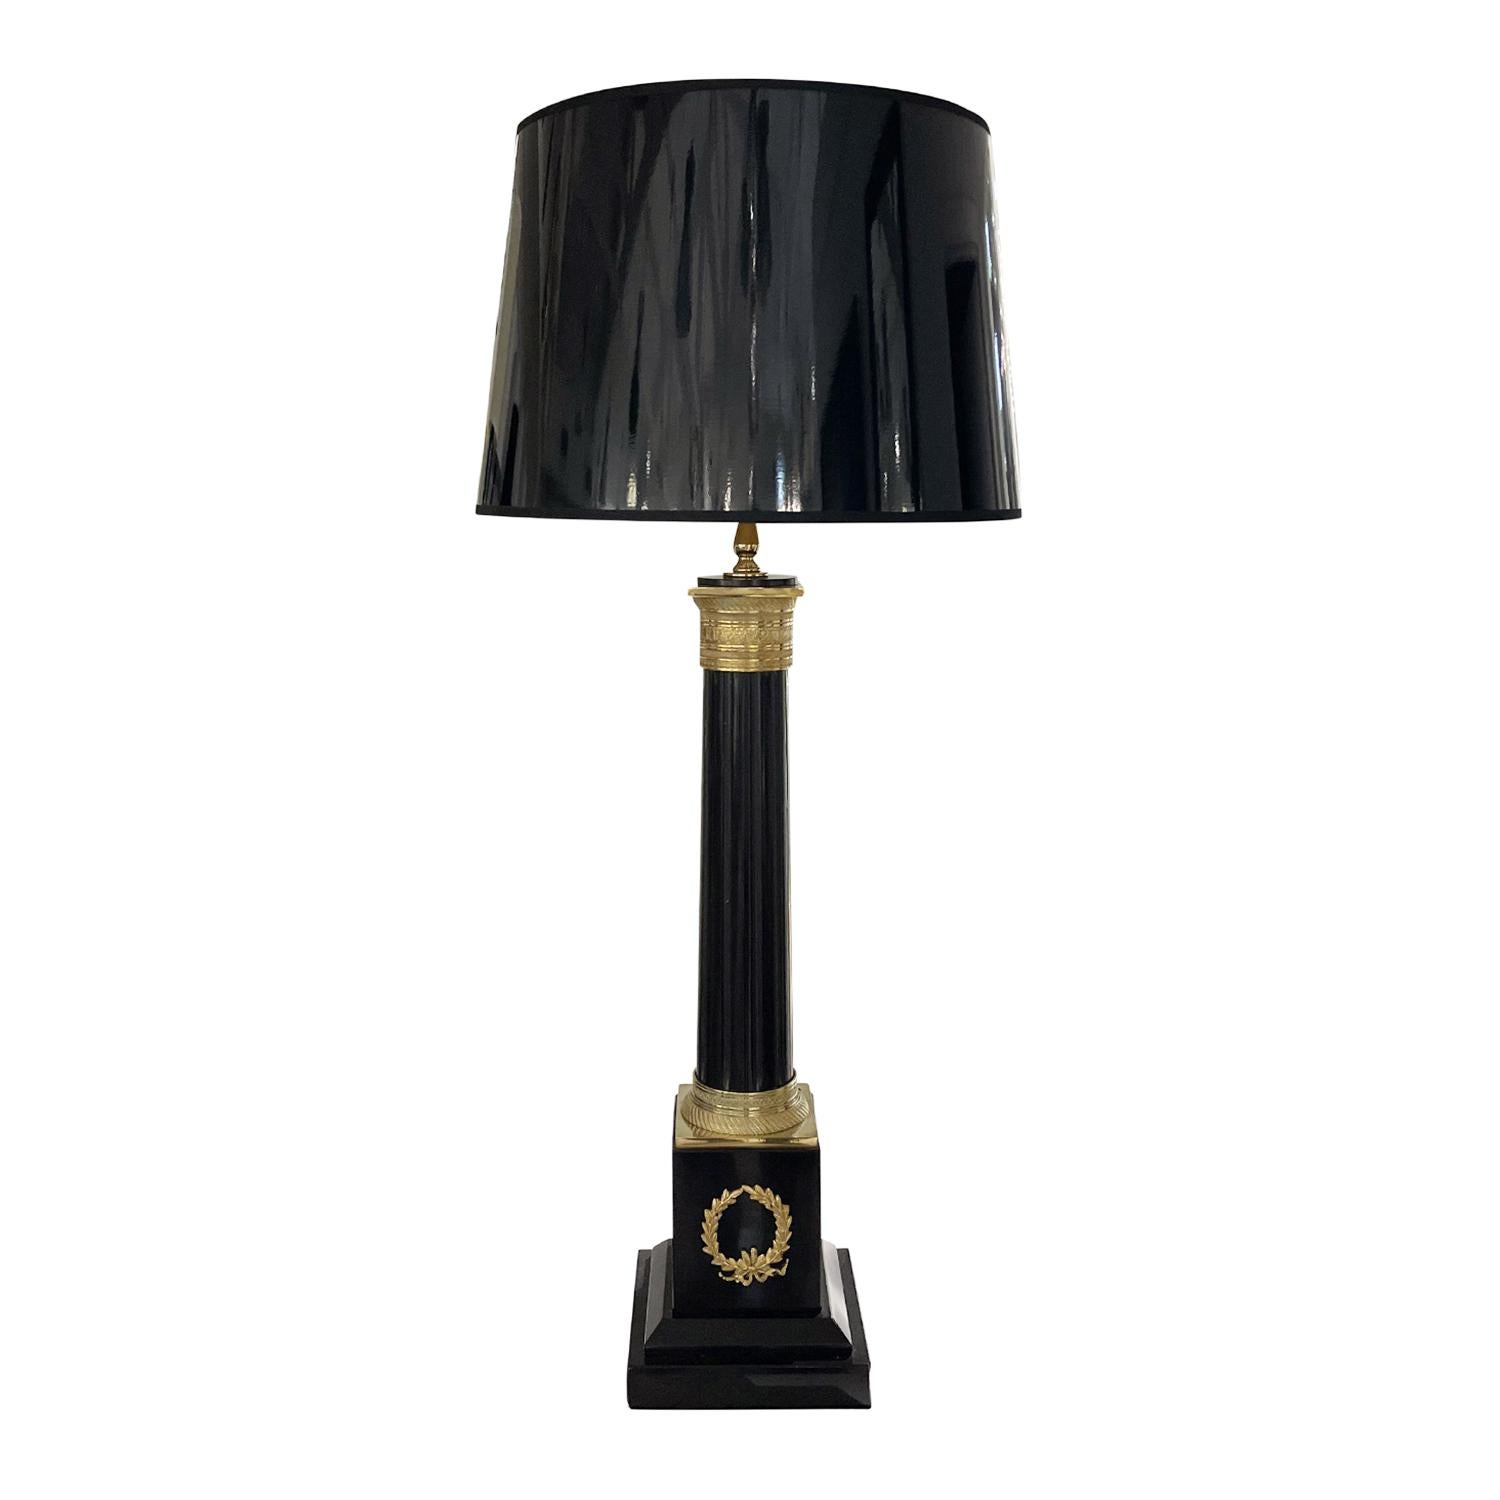 A black, vintage French pair of large table lamps made of hand crafted marble with a new round shade, in good condition. They are composed with its original switch, particularized by gilded bronze décor, featuring a one light socket. The Parisian